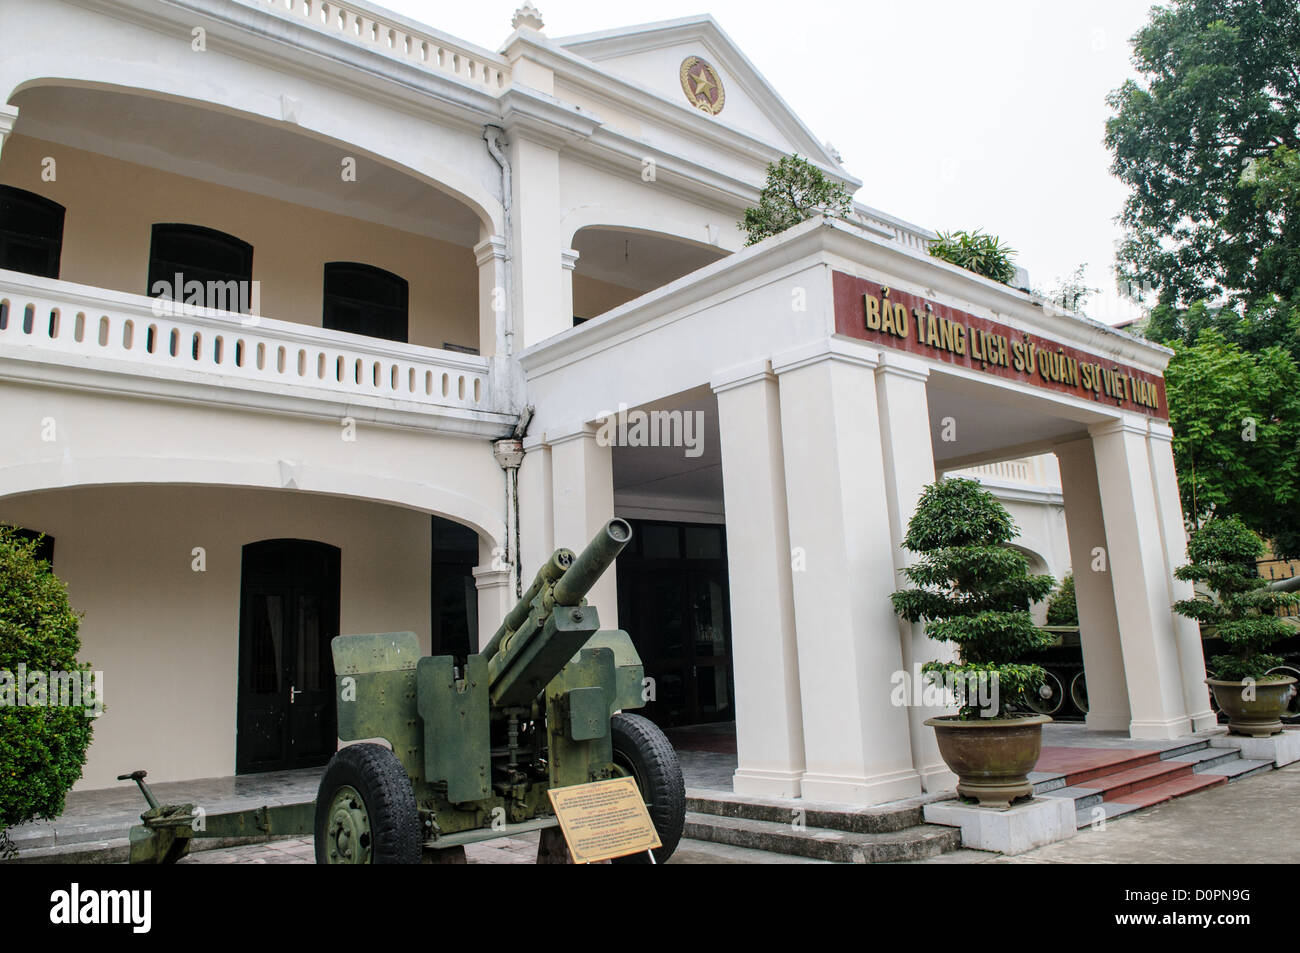 HANOI, Vietnam - HANOI, Vietnam - The front entrance to the original building of the Vietnam Military History Museum. The museum was opened on July 17, 1956, two years after the victory over the French at Dien Bien Phu. It is also known as the Army Museum (the Vietnamese had little in the way of naval or air forces at the time) and is located in central Hanoi in the Ba Dinh District near the Lenin Monument in Lenin Park and not far from the Ho Chi Minh Mausoleum. Stock Photo